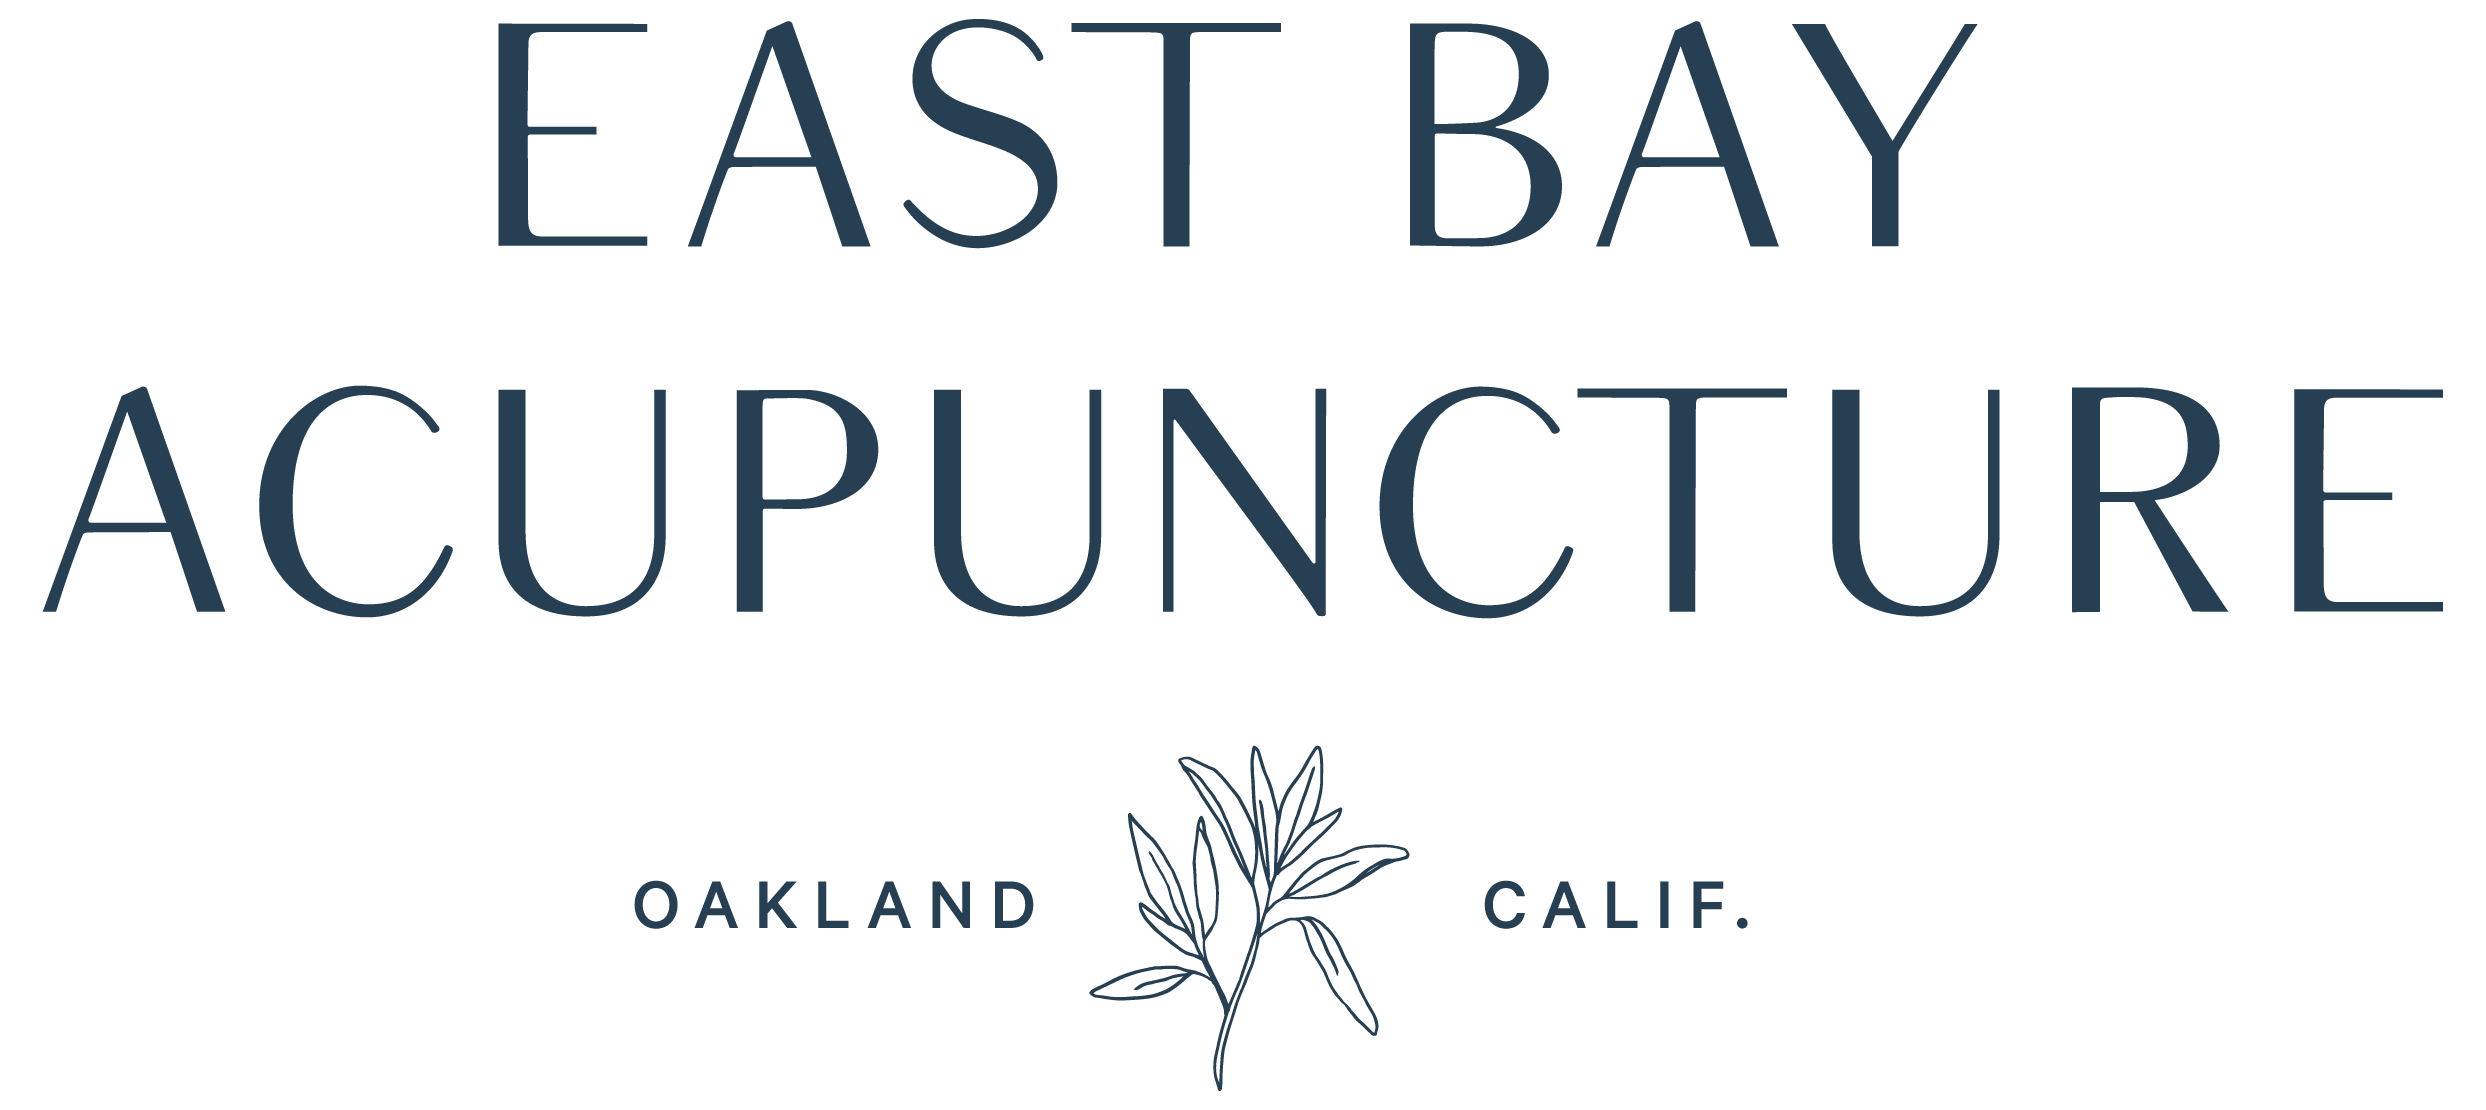 East Bay Acupuncture 